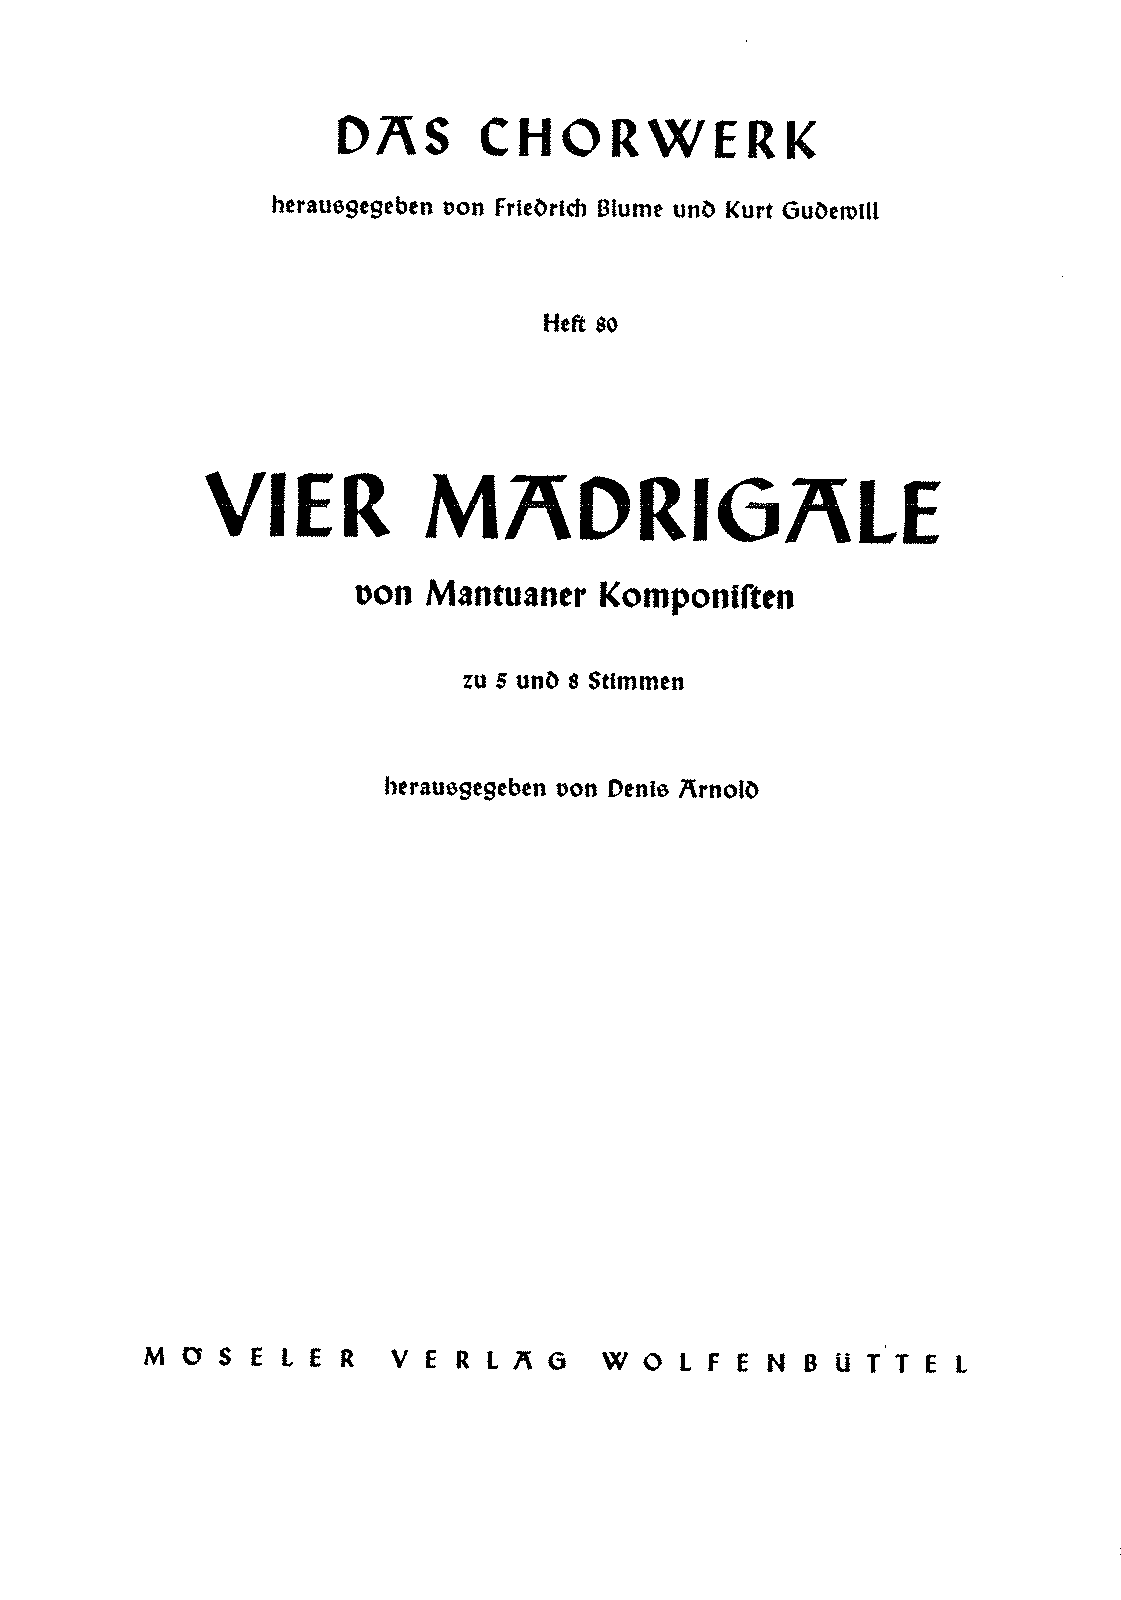 4 Madrigals of Mantuan Composers (Various) - IMSLP